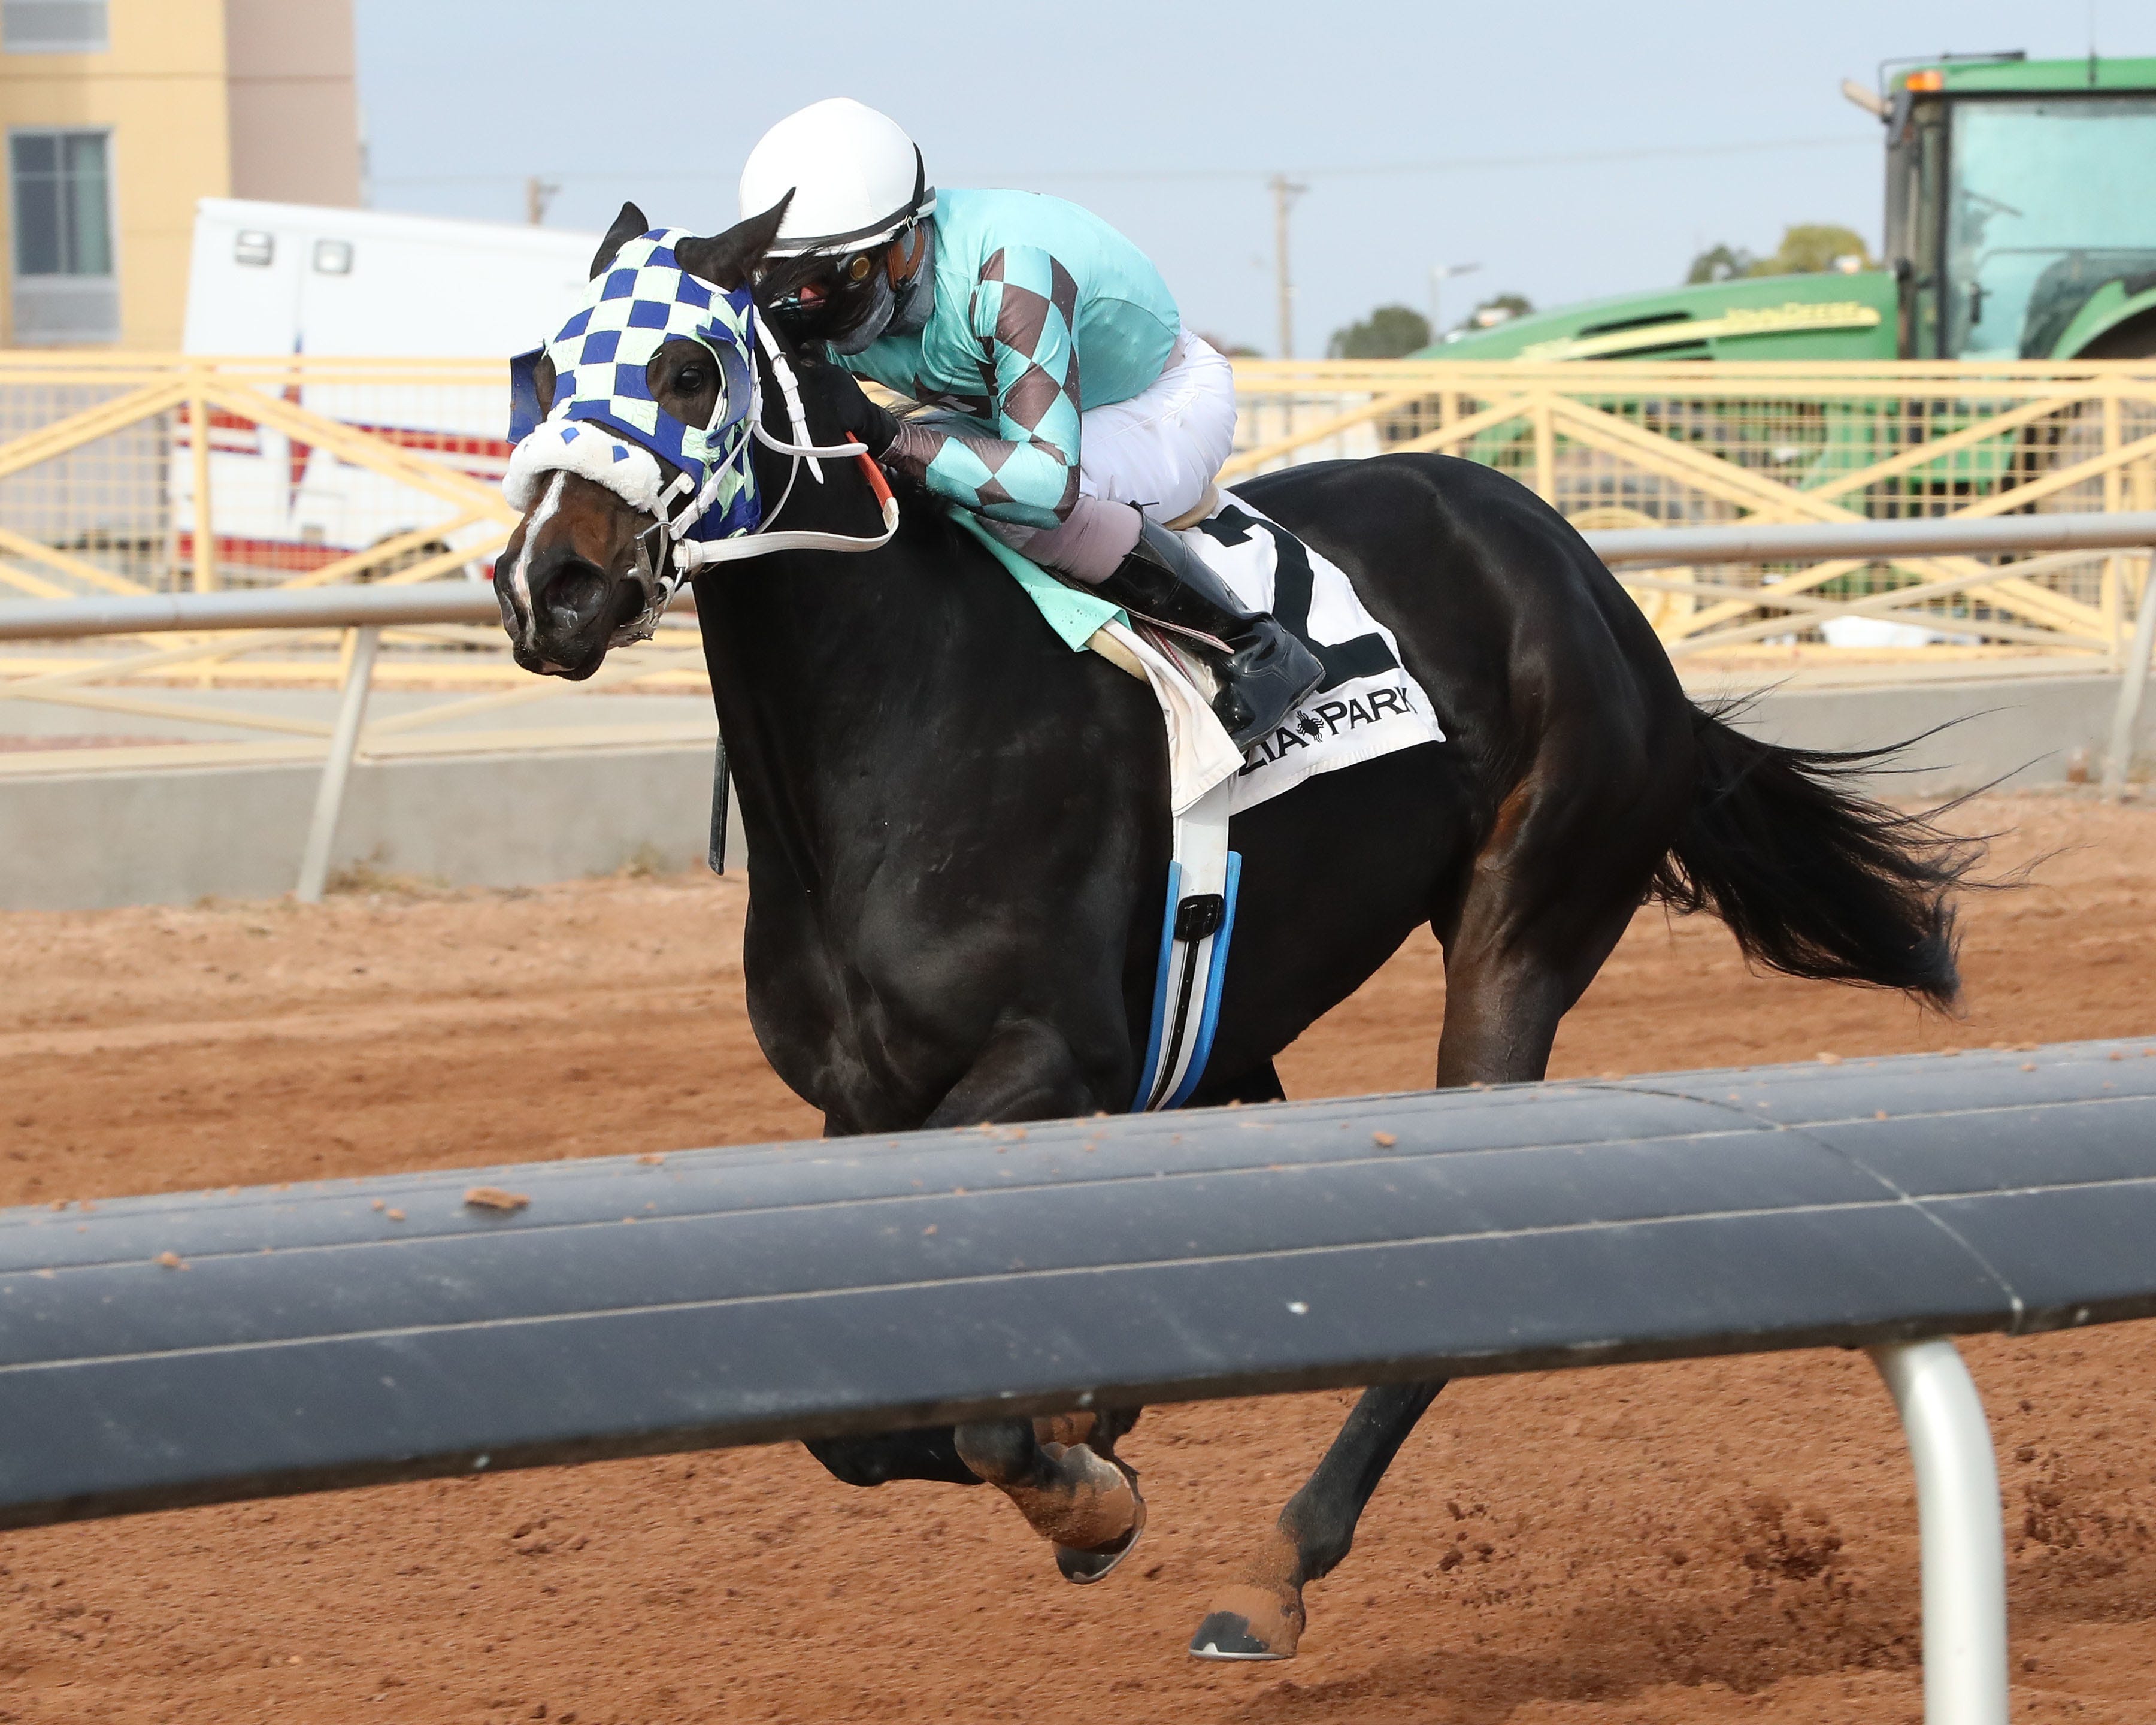 Sunland Park opens with New Mexico Racing Commission, KLAQ